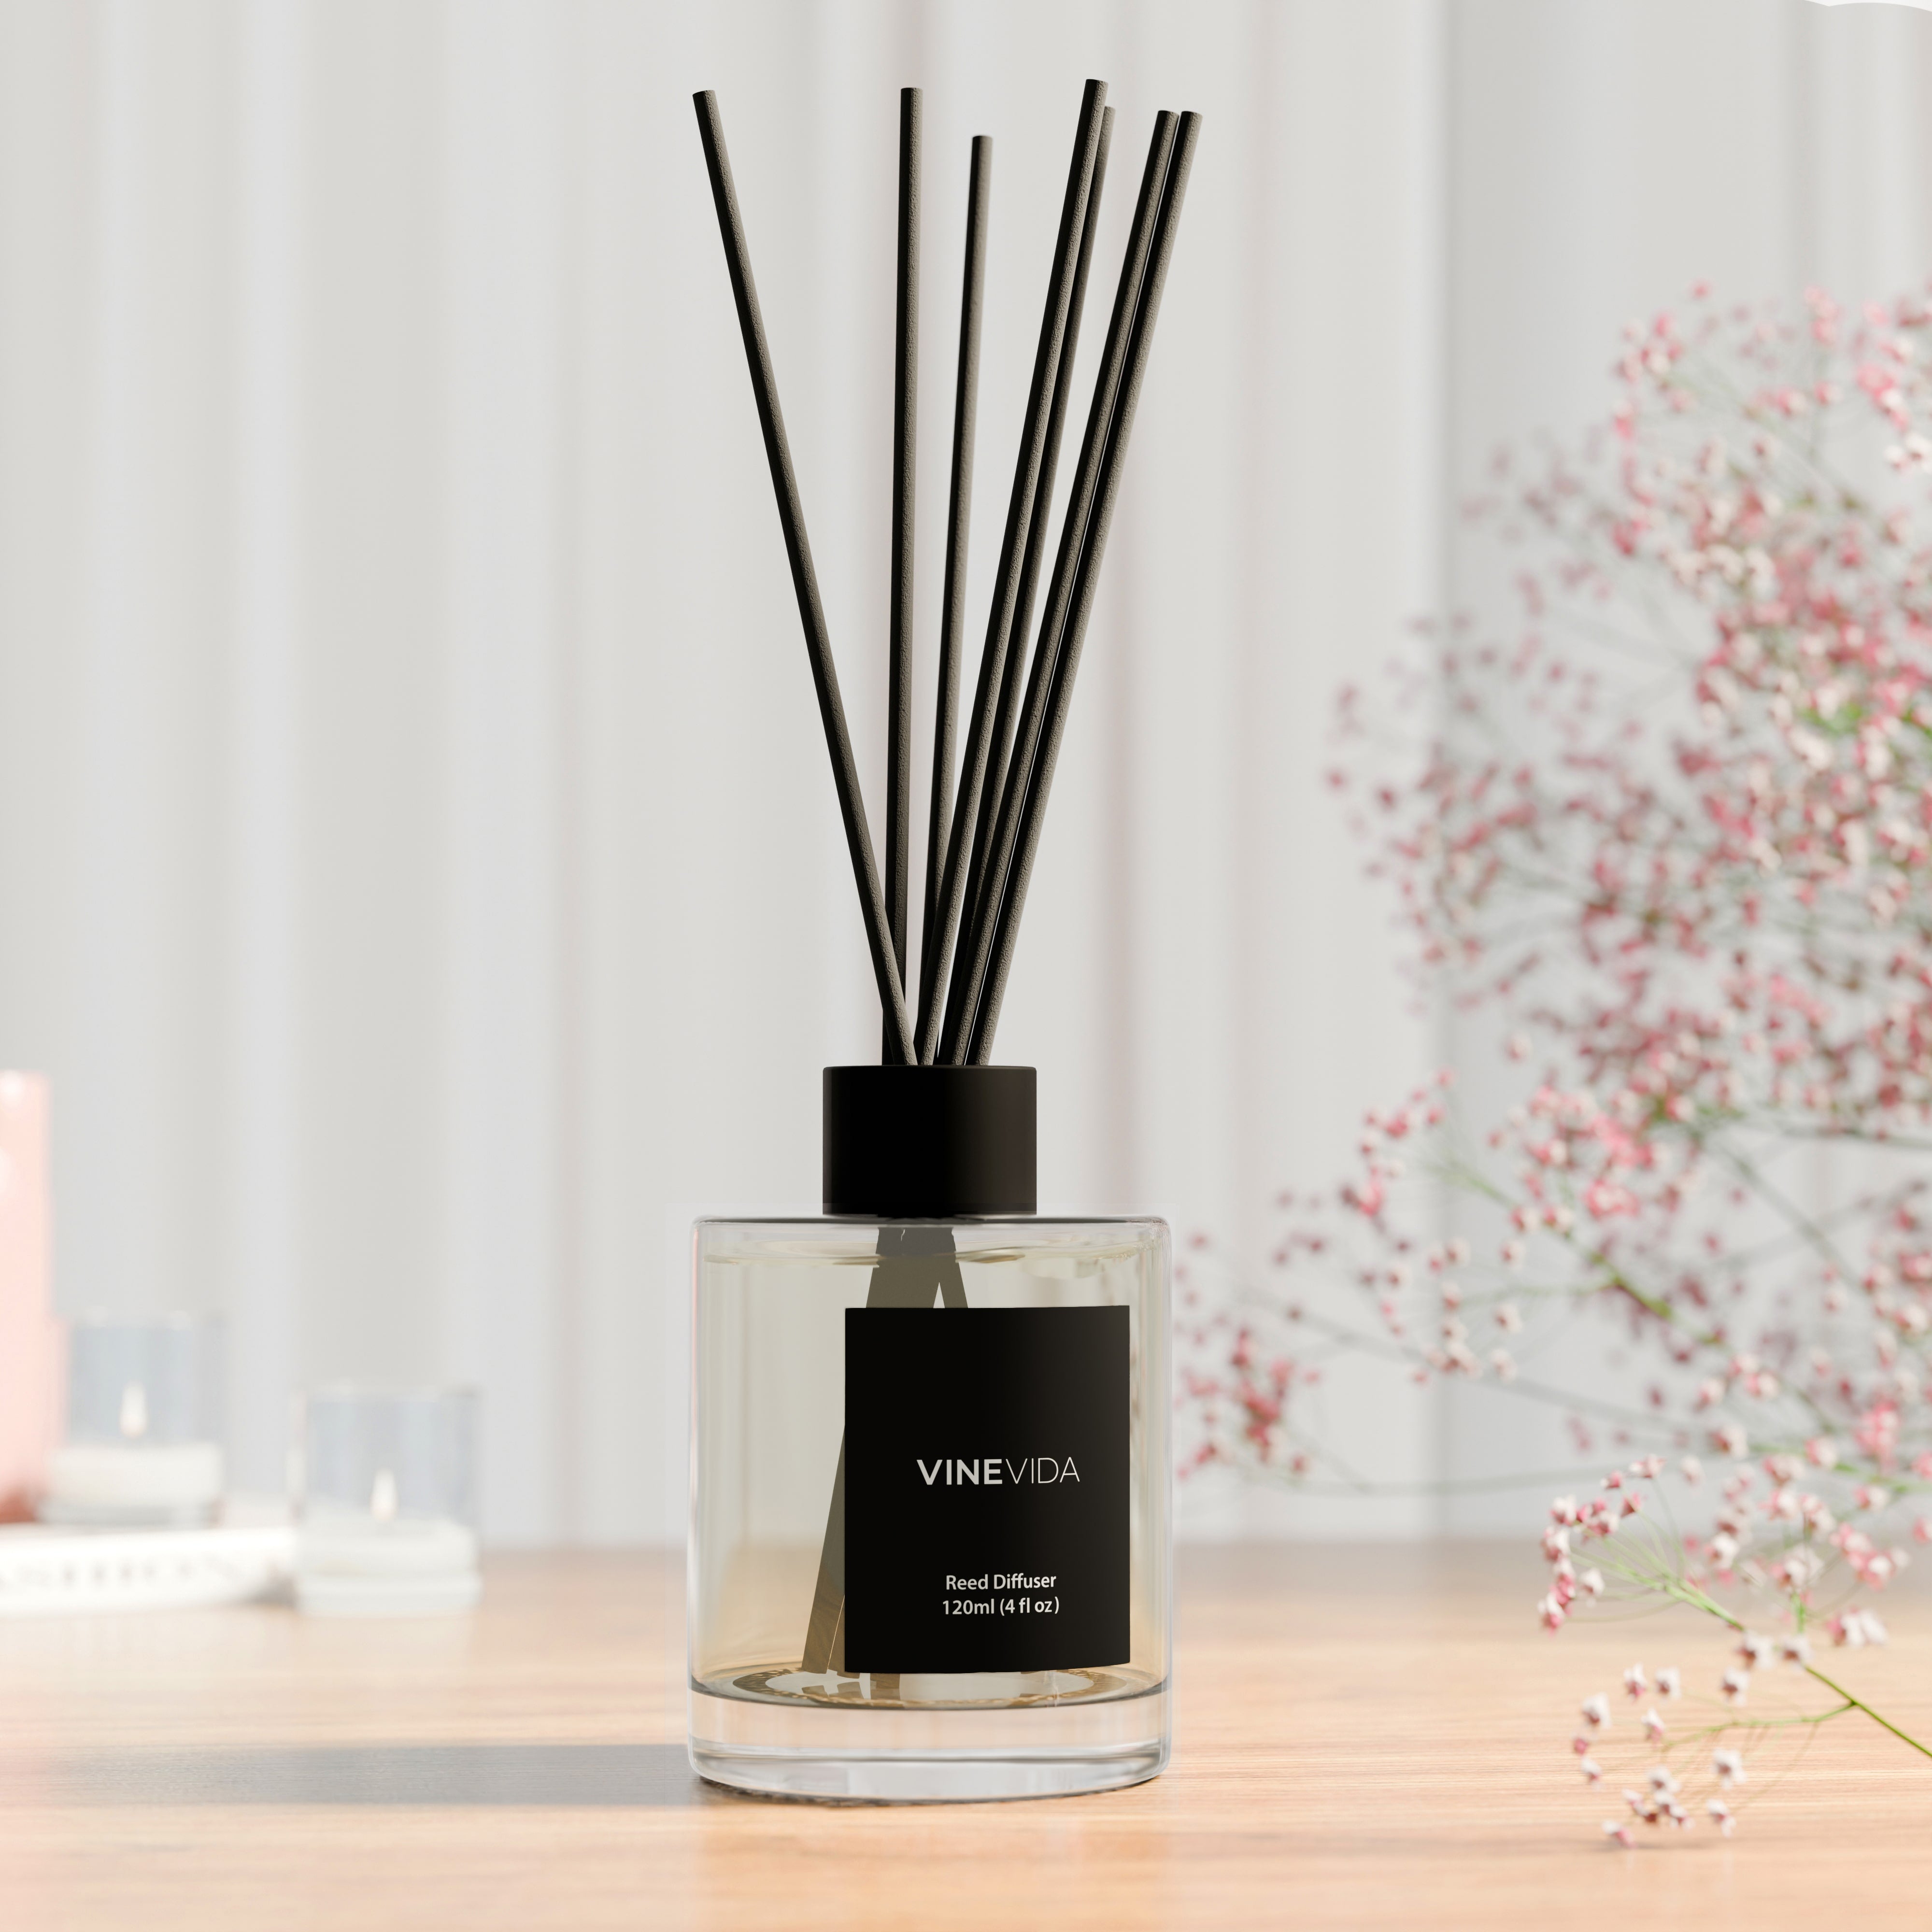 NO. 1408 Reed Diffuser - Inspired by: Wild Poppy by Nest